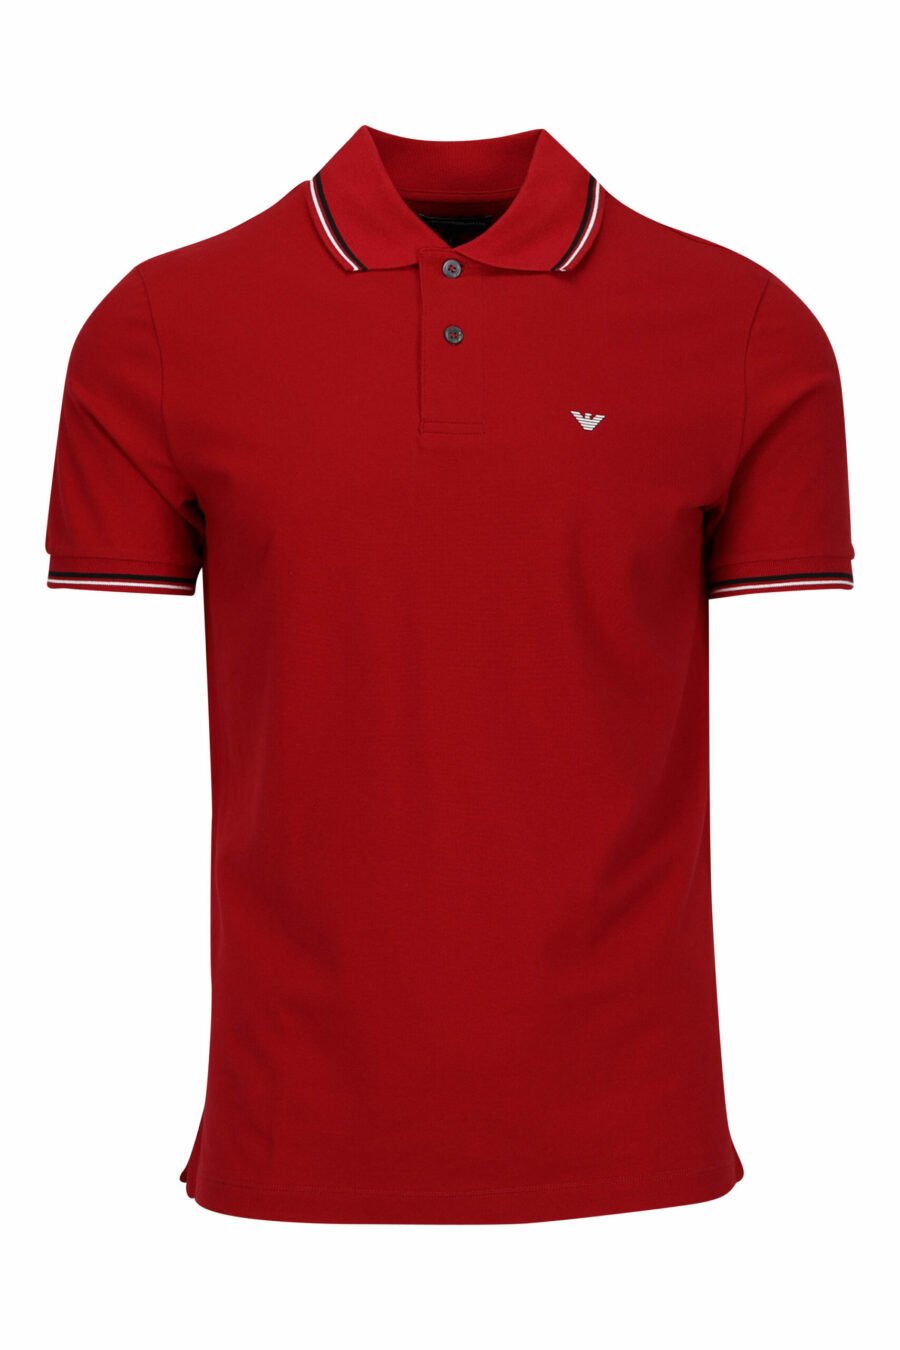 Red knitted polo shirt with striped collar and mini eagle logo - 8056861420527 scaled